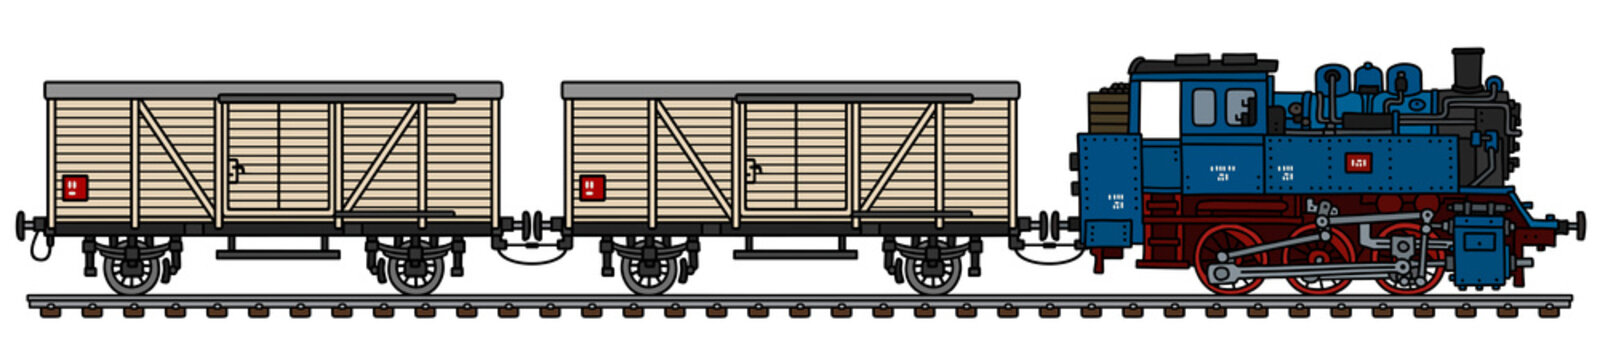 The vectorized hand drawing of a classic freight steam train